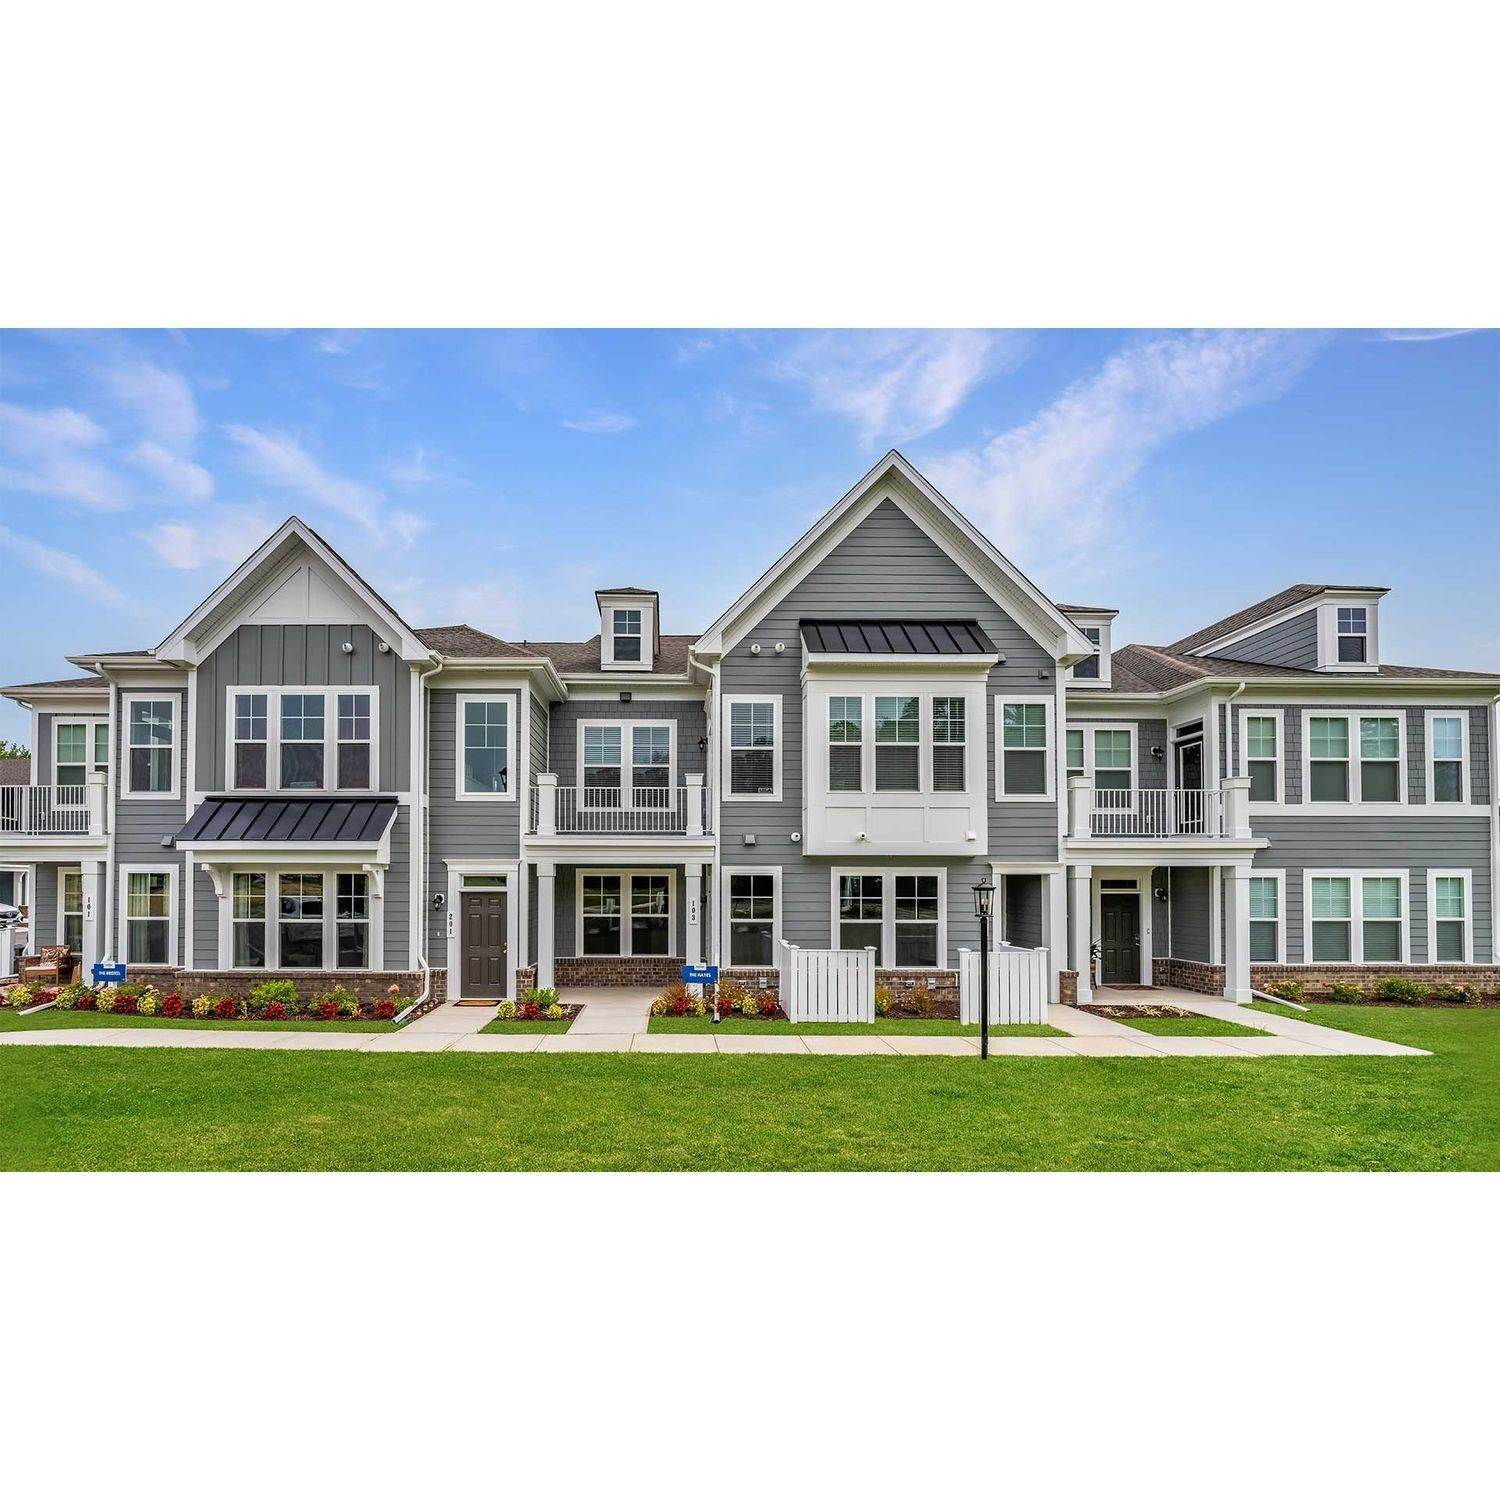 4. The Pointe at Twin Hickory κτίριο σε 4605 Pouncey Tract Road, Glen Allen, VA 23059